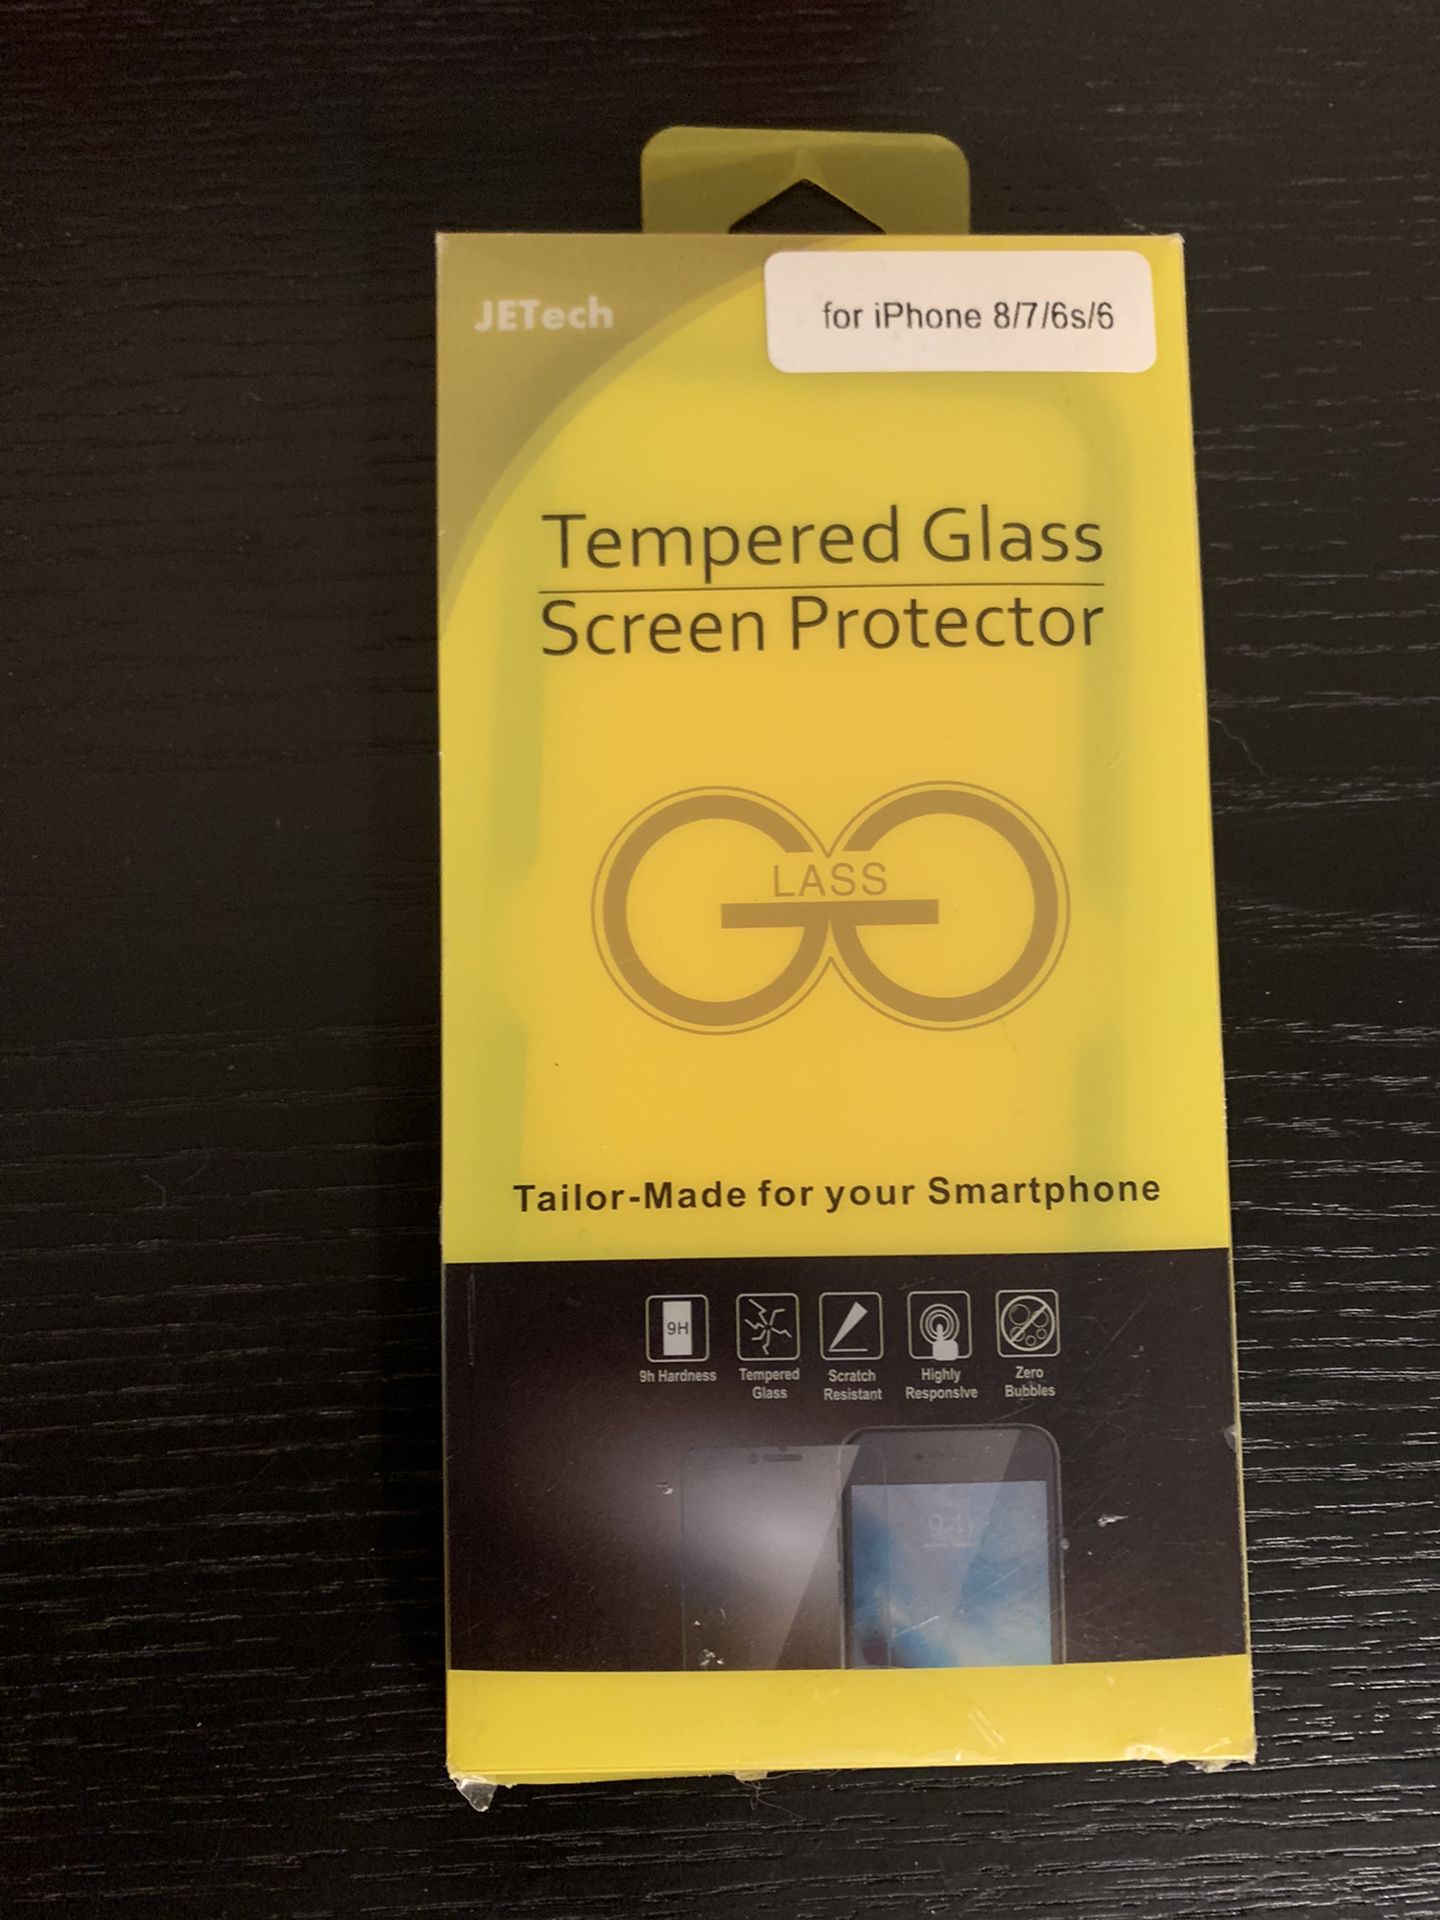 iPhone 6, 6s, 7, 8 screen protector *chk location 1st 77073*